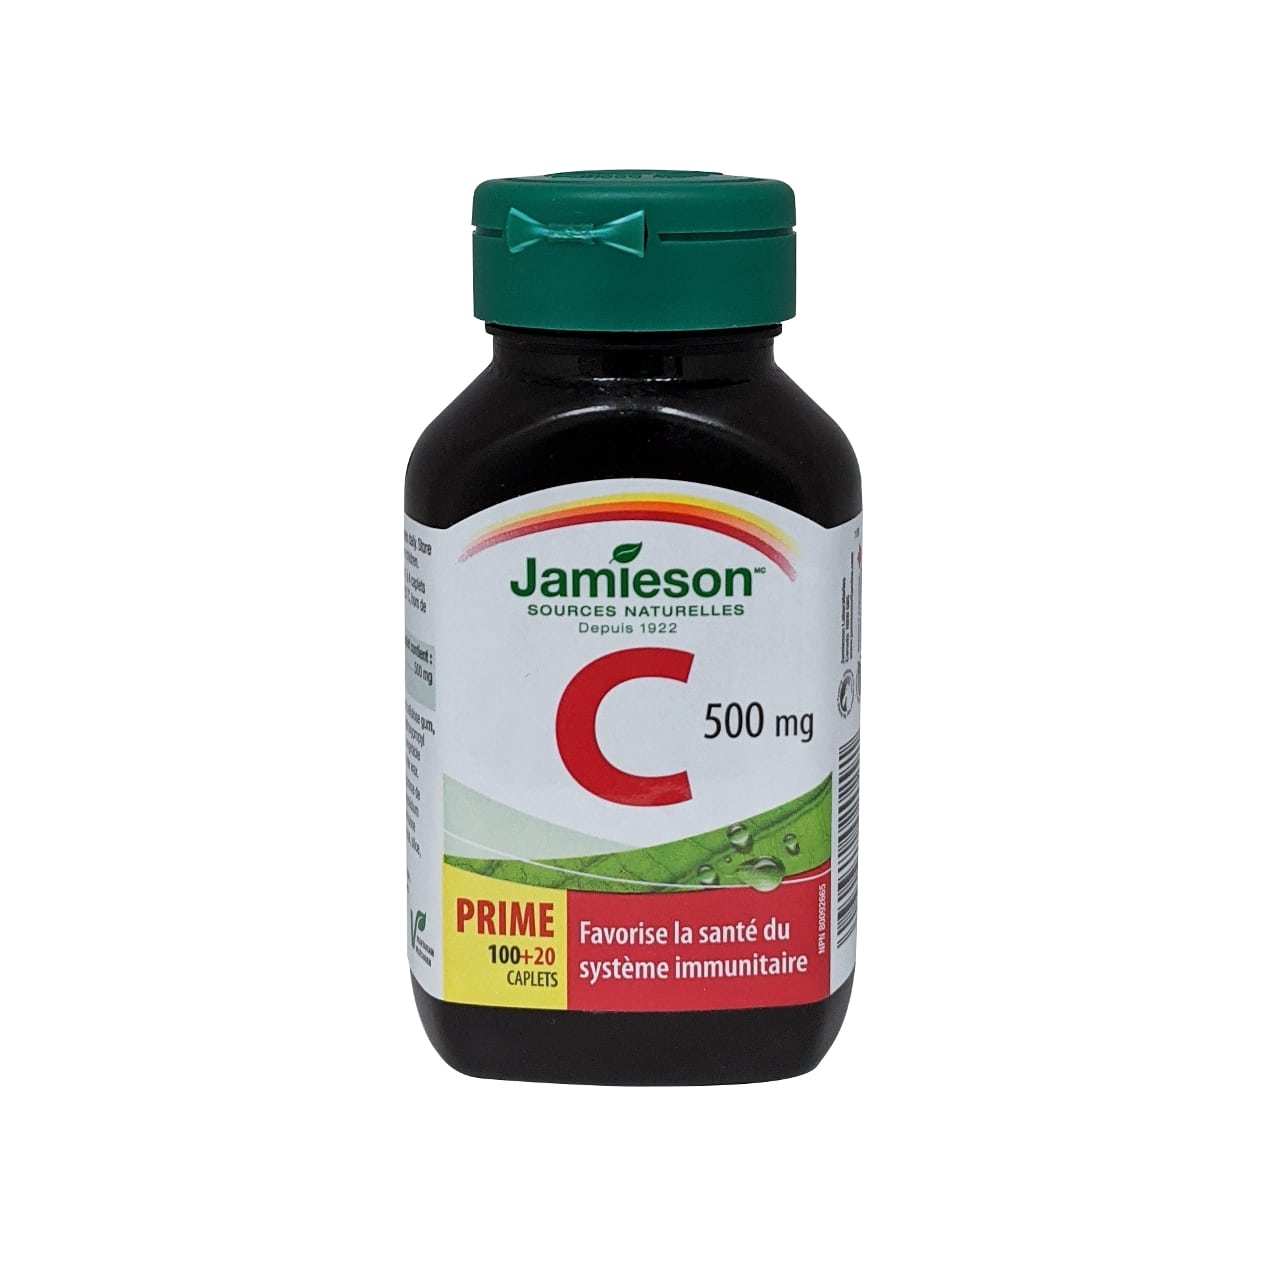 Product label for Jamieson Vitamin C 500mg in French